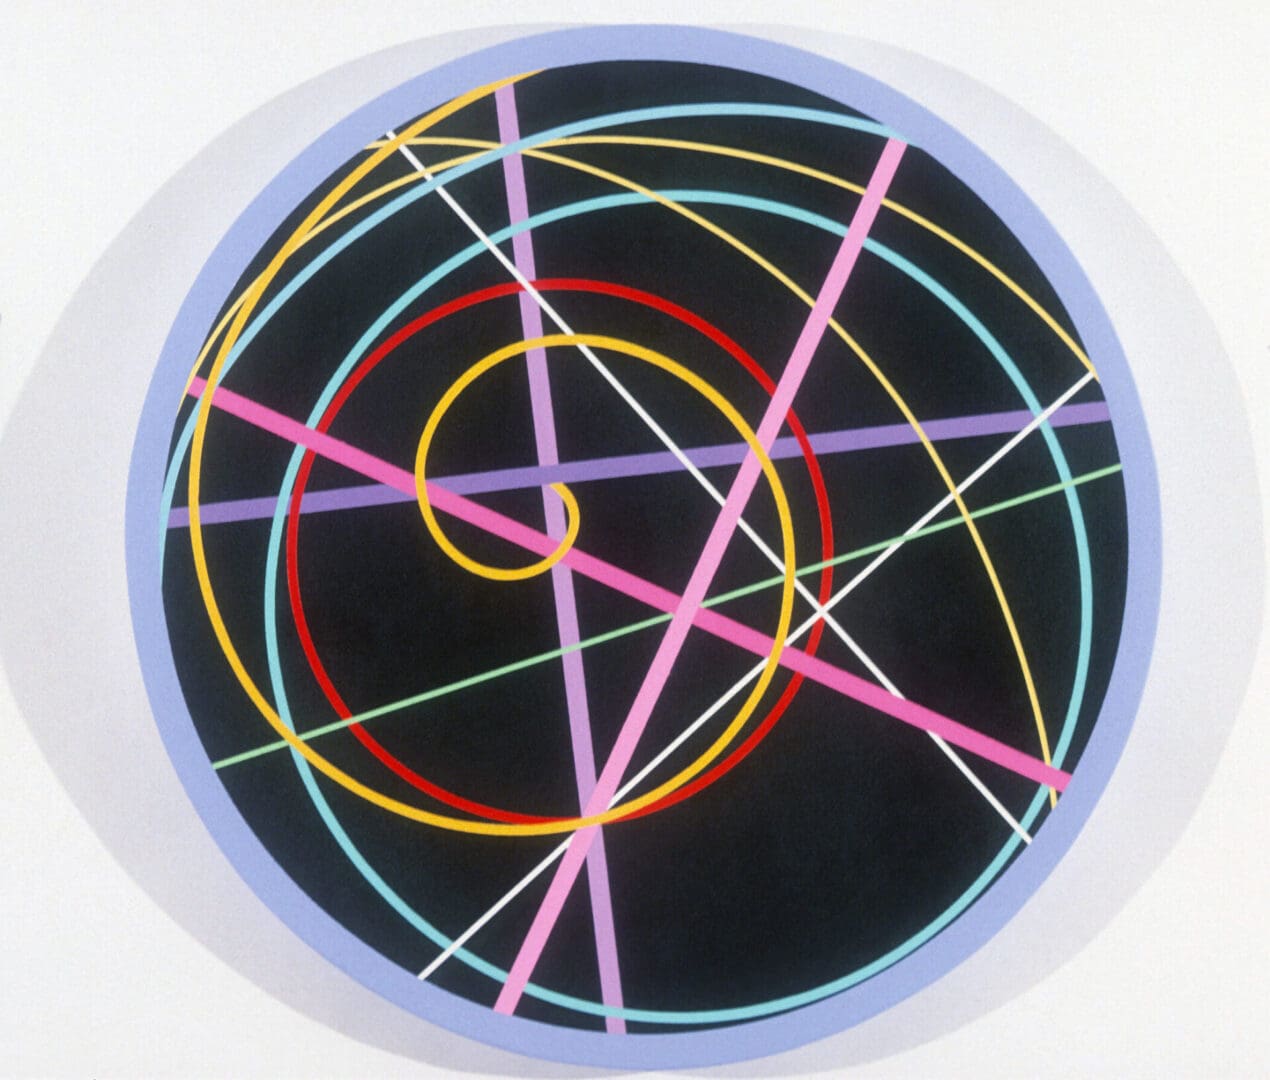 Clifford Singer. Spiral Series. 1989. Acrylic on Canvas. 30 inch diameter